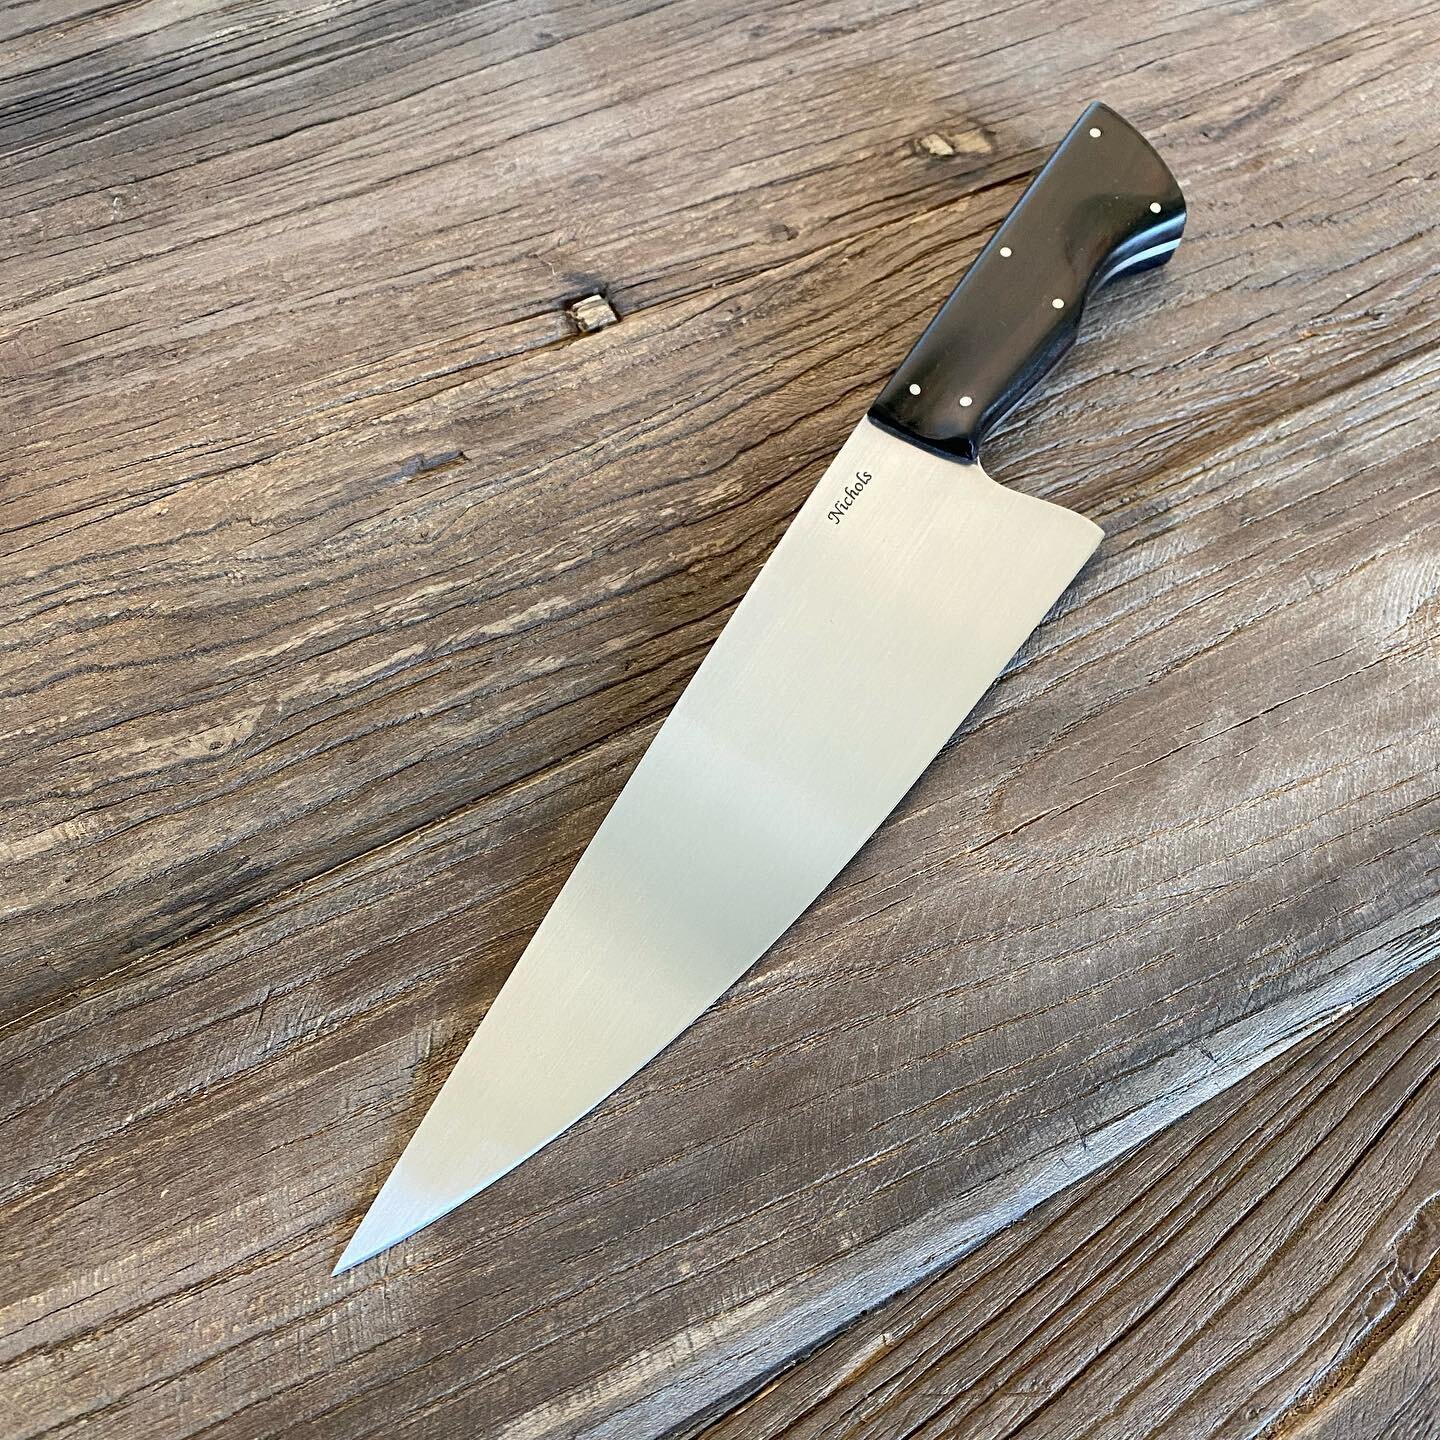 Finished this 8.5 inch chef knife! Blade is 52100 with ebony handles and stainless pins. I ground a nice thin flat grind with an aggressive distal taper to make it light and fast. Really happy with this piece! DM me if you want one like it!